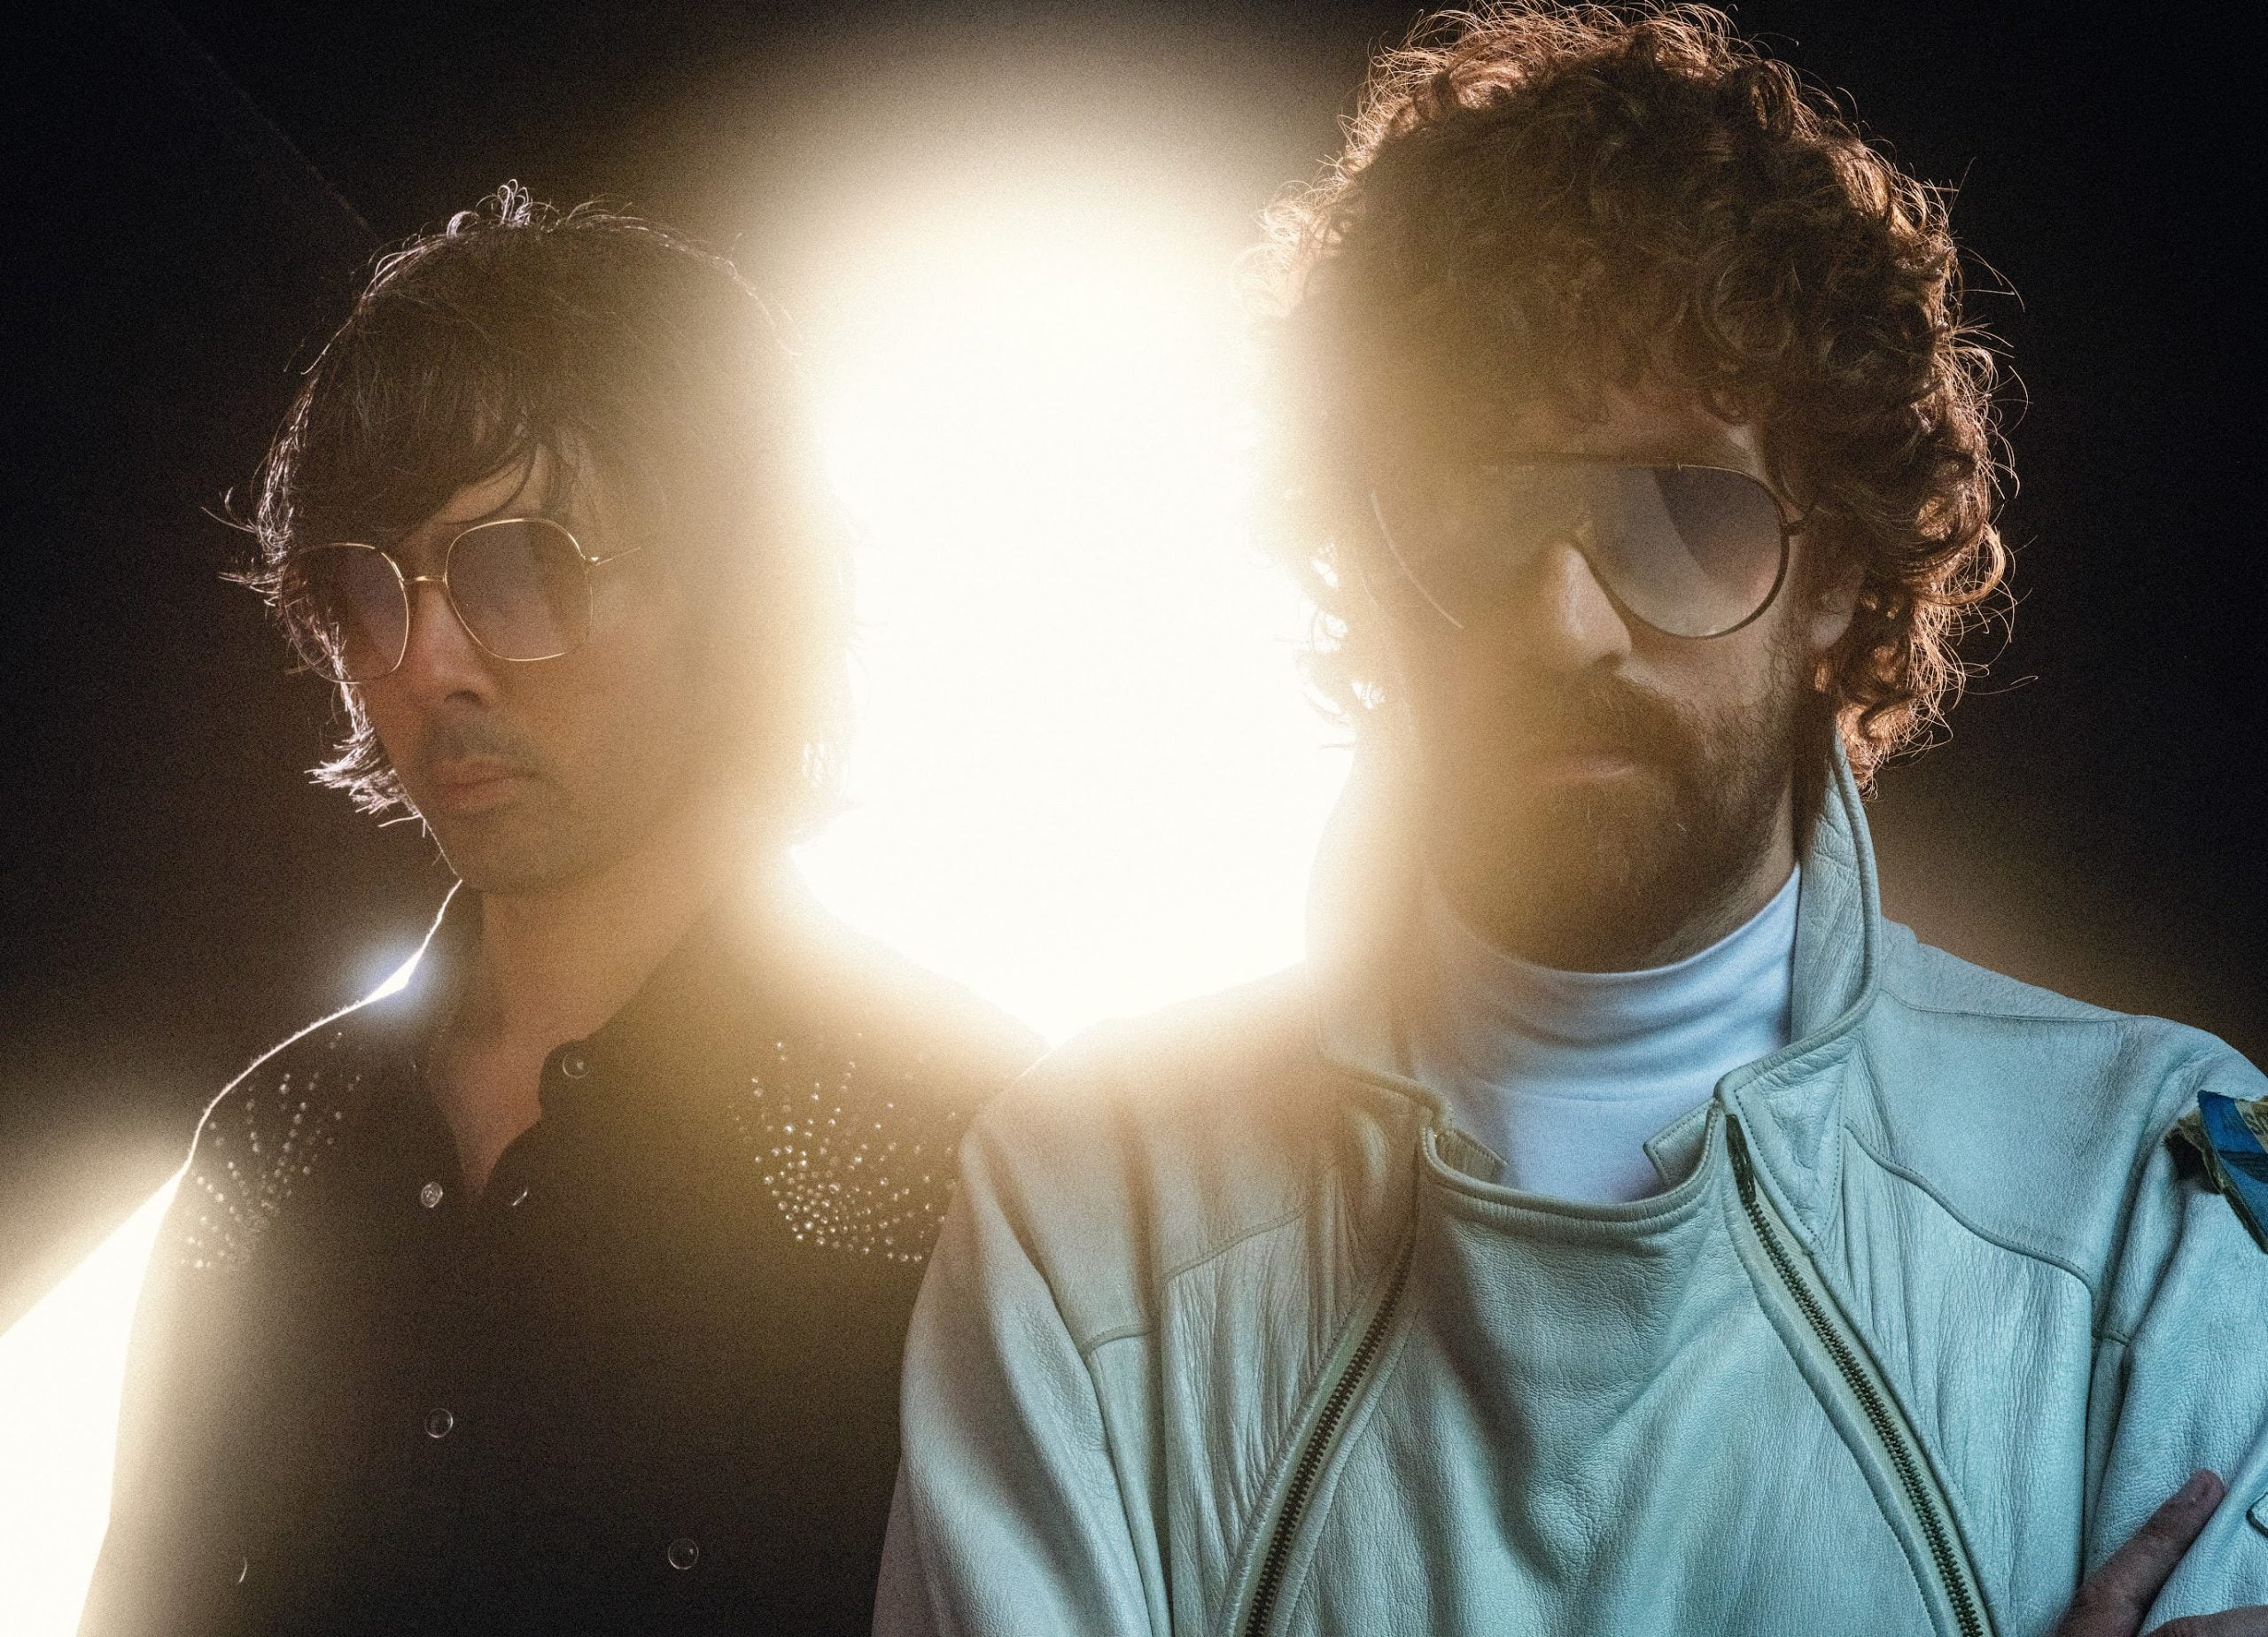 Justice releases latest single from new album, ‘Saturnine’: Listen